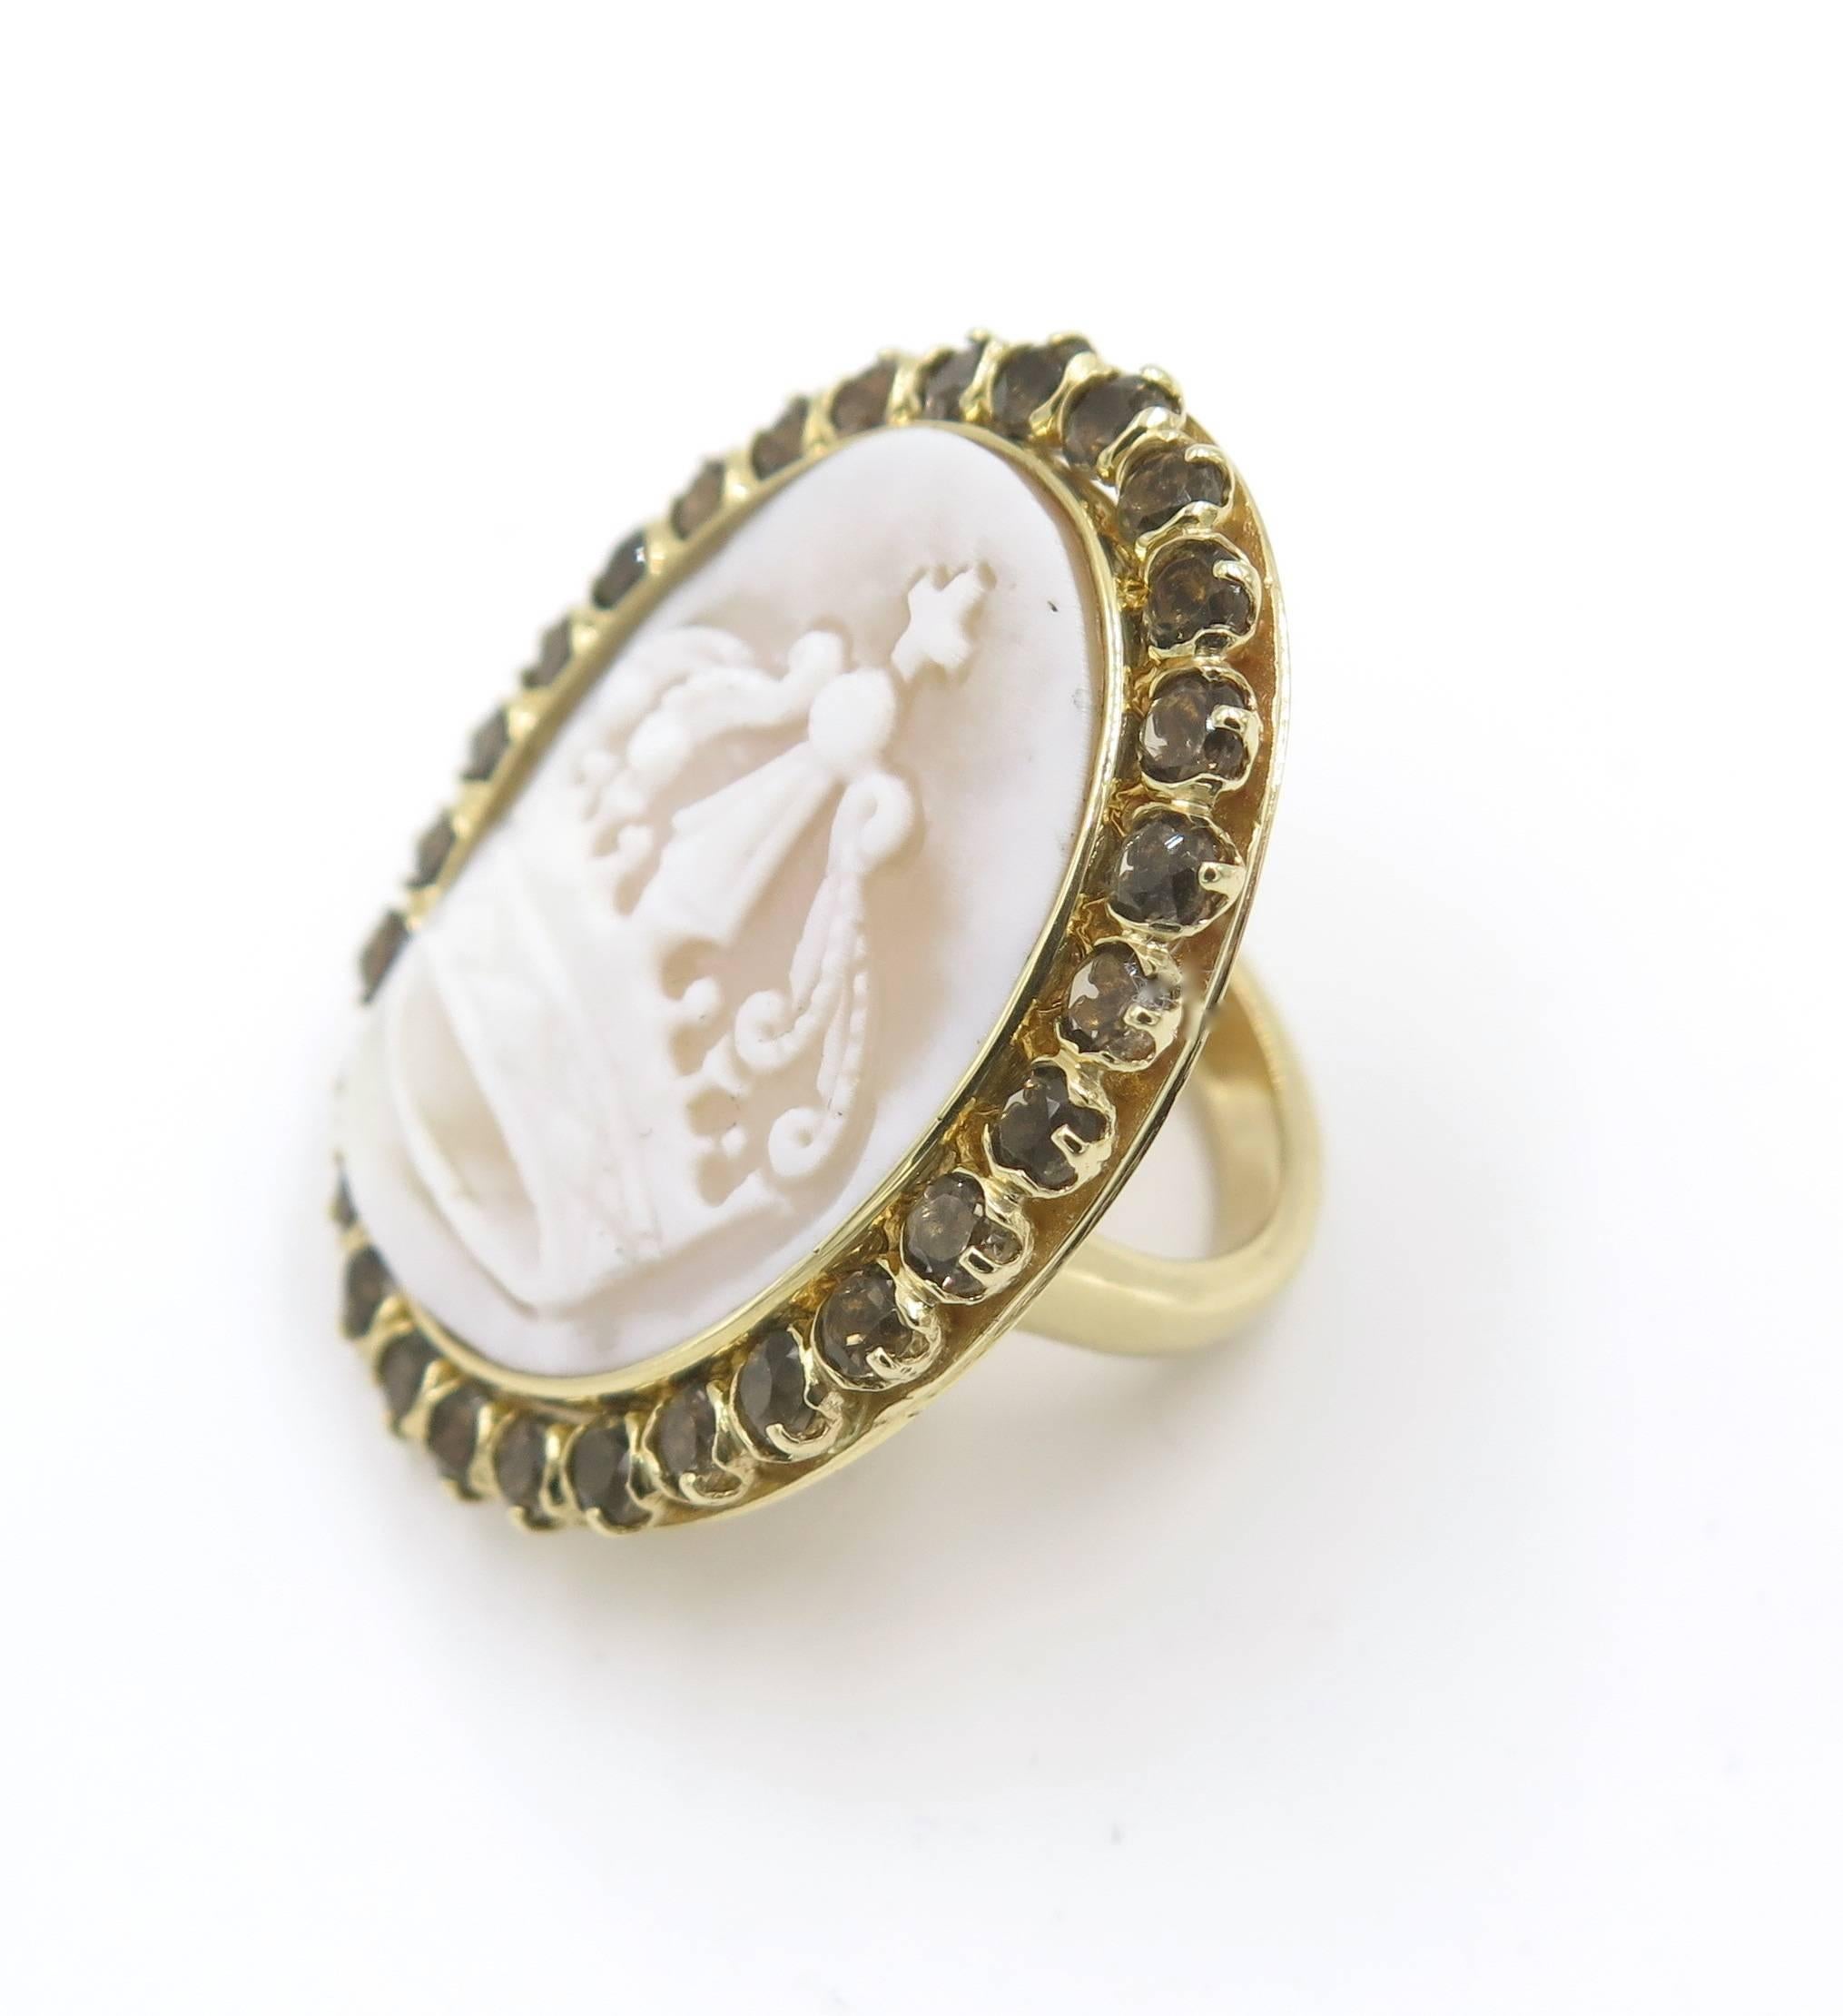 A 14 karat rose gold, shell cameo and smoky quartz ring. Set with a carved shell cameo of a crown, within a circular-cut smoky quartz surround. The ring has a gross weight of approximately 16.5 grams and is a size 6.